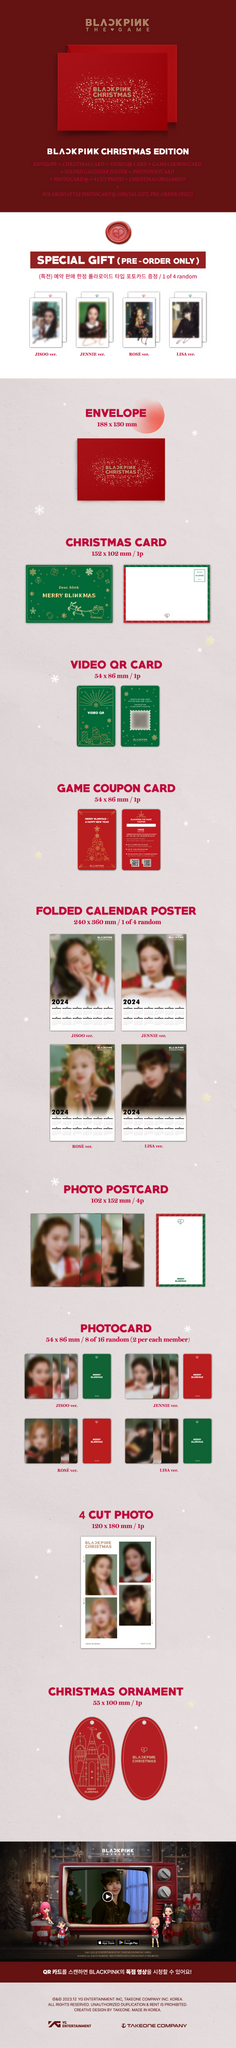 BLACKPINK THE GAME PHOTOCARD COLLECTION (CHRISTMAS EDITION)